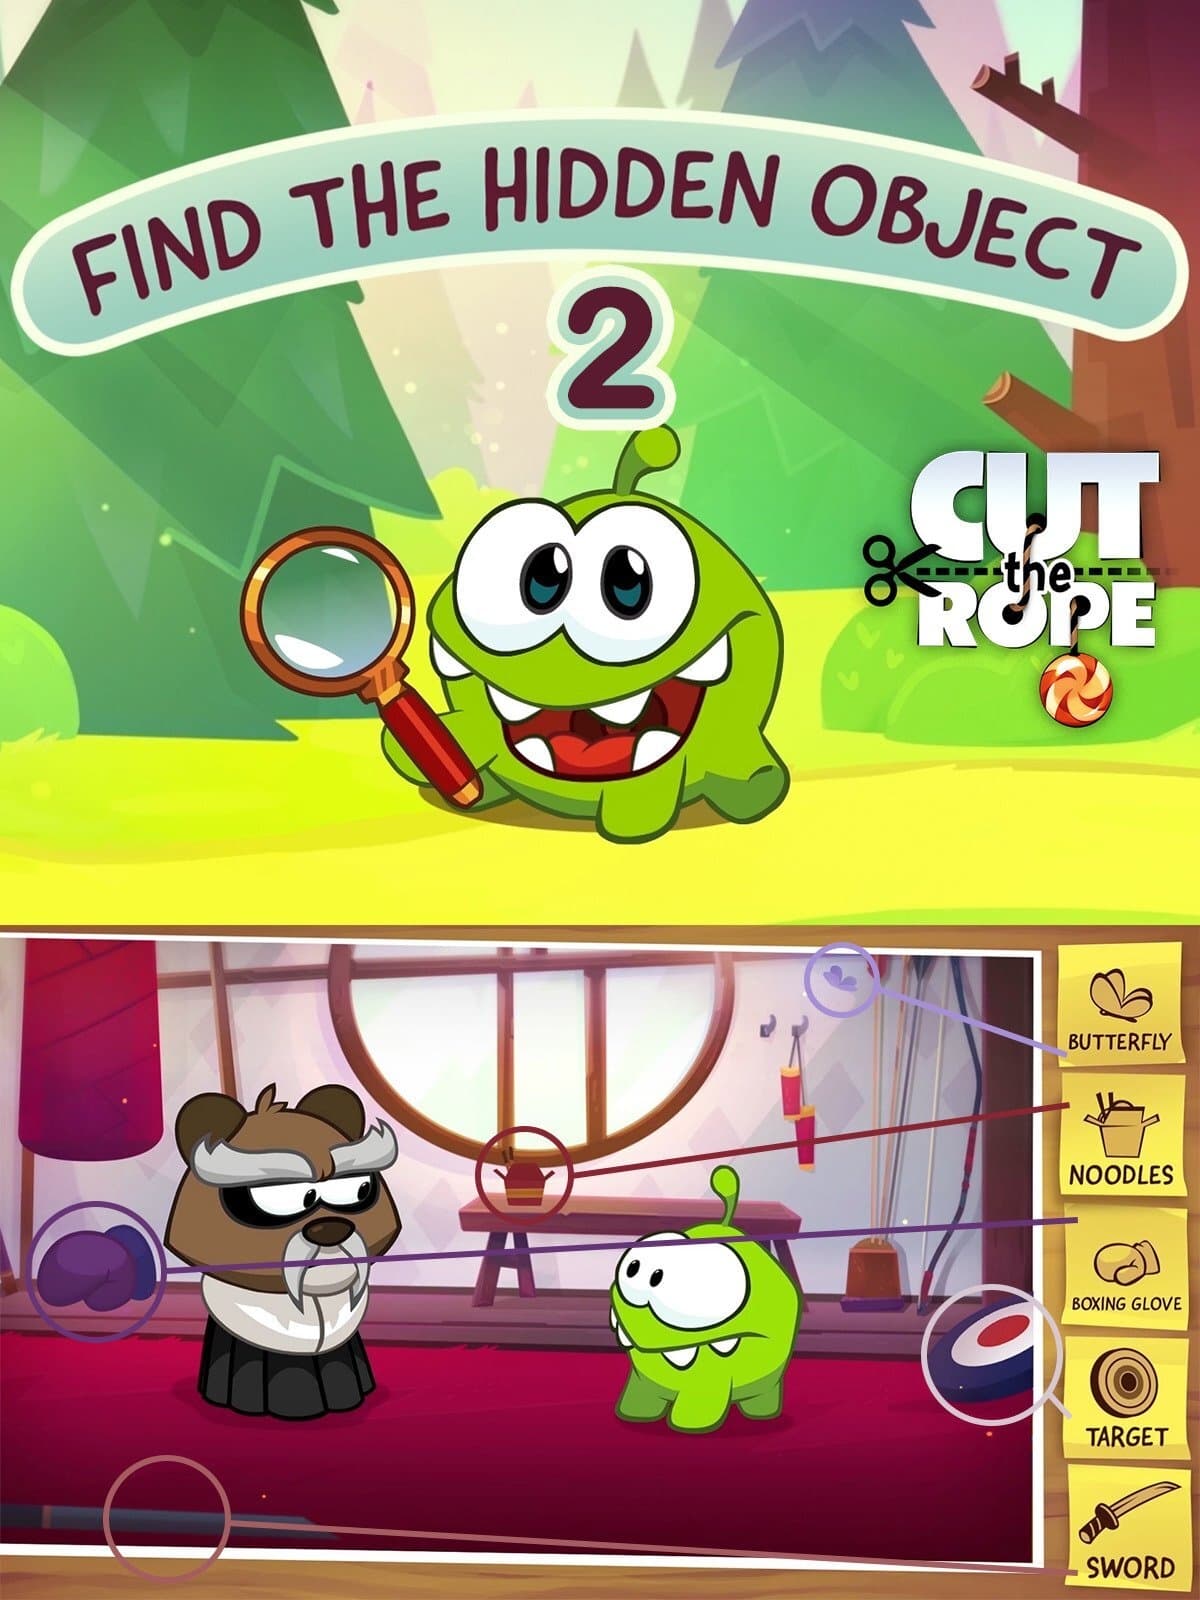 Cut the Rope - Find the Hidden Object 2